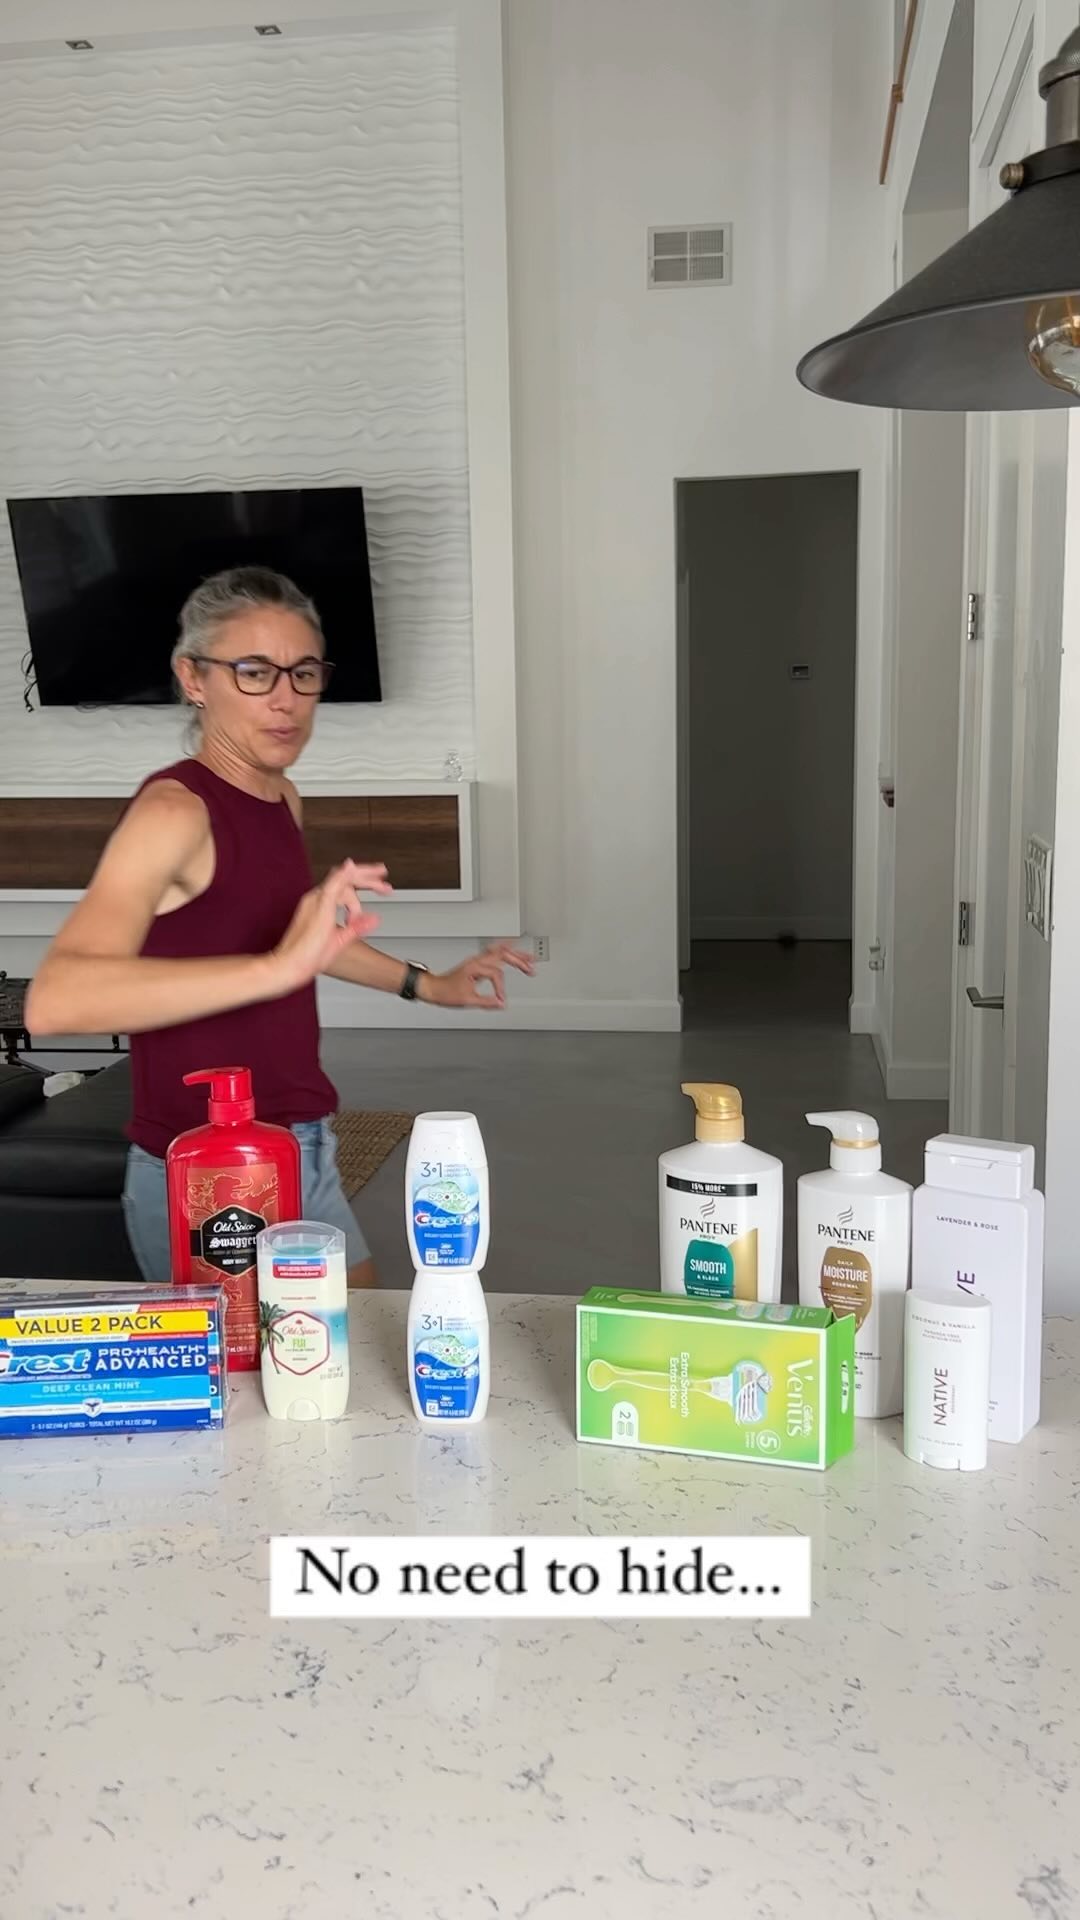 IT’S TIME TO STOCK UP!⁣
🧼⁣
On all of your favorite P&G products at @walgreens ! We just picked up our favorites and a few new ones to try out!⁣
⁣
🌟 Until 8/27 - spend $20, get $5 Register Rewards in store!!⁣
⁣
🧖🏽‍♀️ I discovered and fell in love with @native . Wish I could send smell through the video for you!! ⁣
⁣
🛁 Christian stocked up on all of his favorites by @oldspice and we replenished our @pantene and @crest stock. ⁣
⁣
💝 We love when our favorite products give us even more bang for our buck, but hurry while the promotion lasts! ⁣
⁣
🏪 You can find those and more, at Walgreens or Walgreens.com. #walgreens happens to be the nearest store to our home, and super convenient to get to, but use the link in stories to find a store near you! ⁣
⁣
#ad #availableatWalgreens